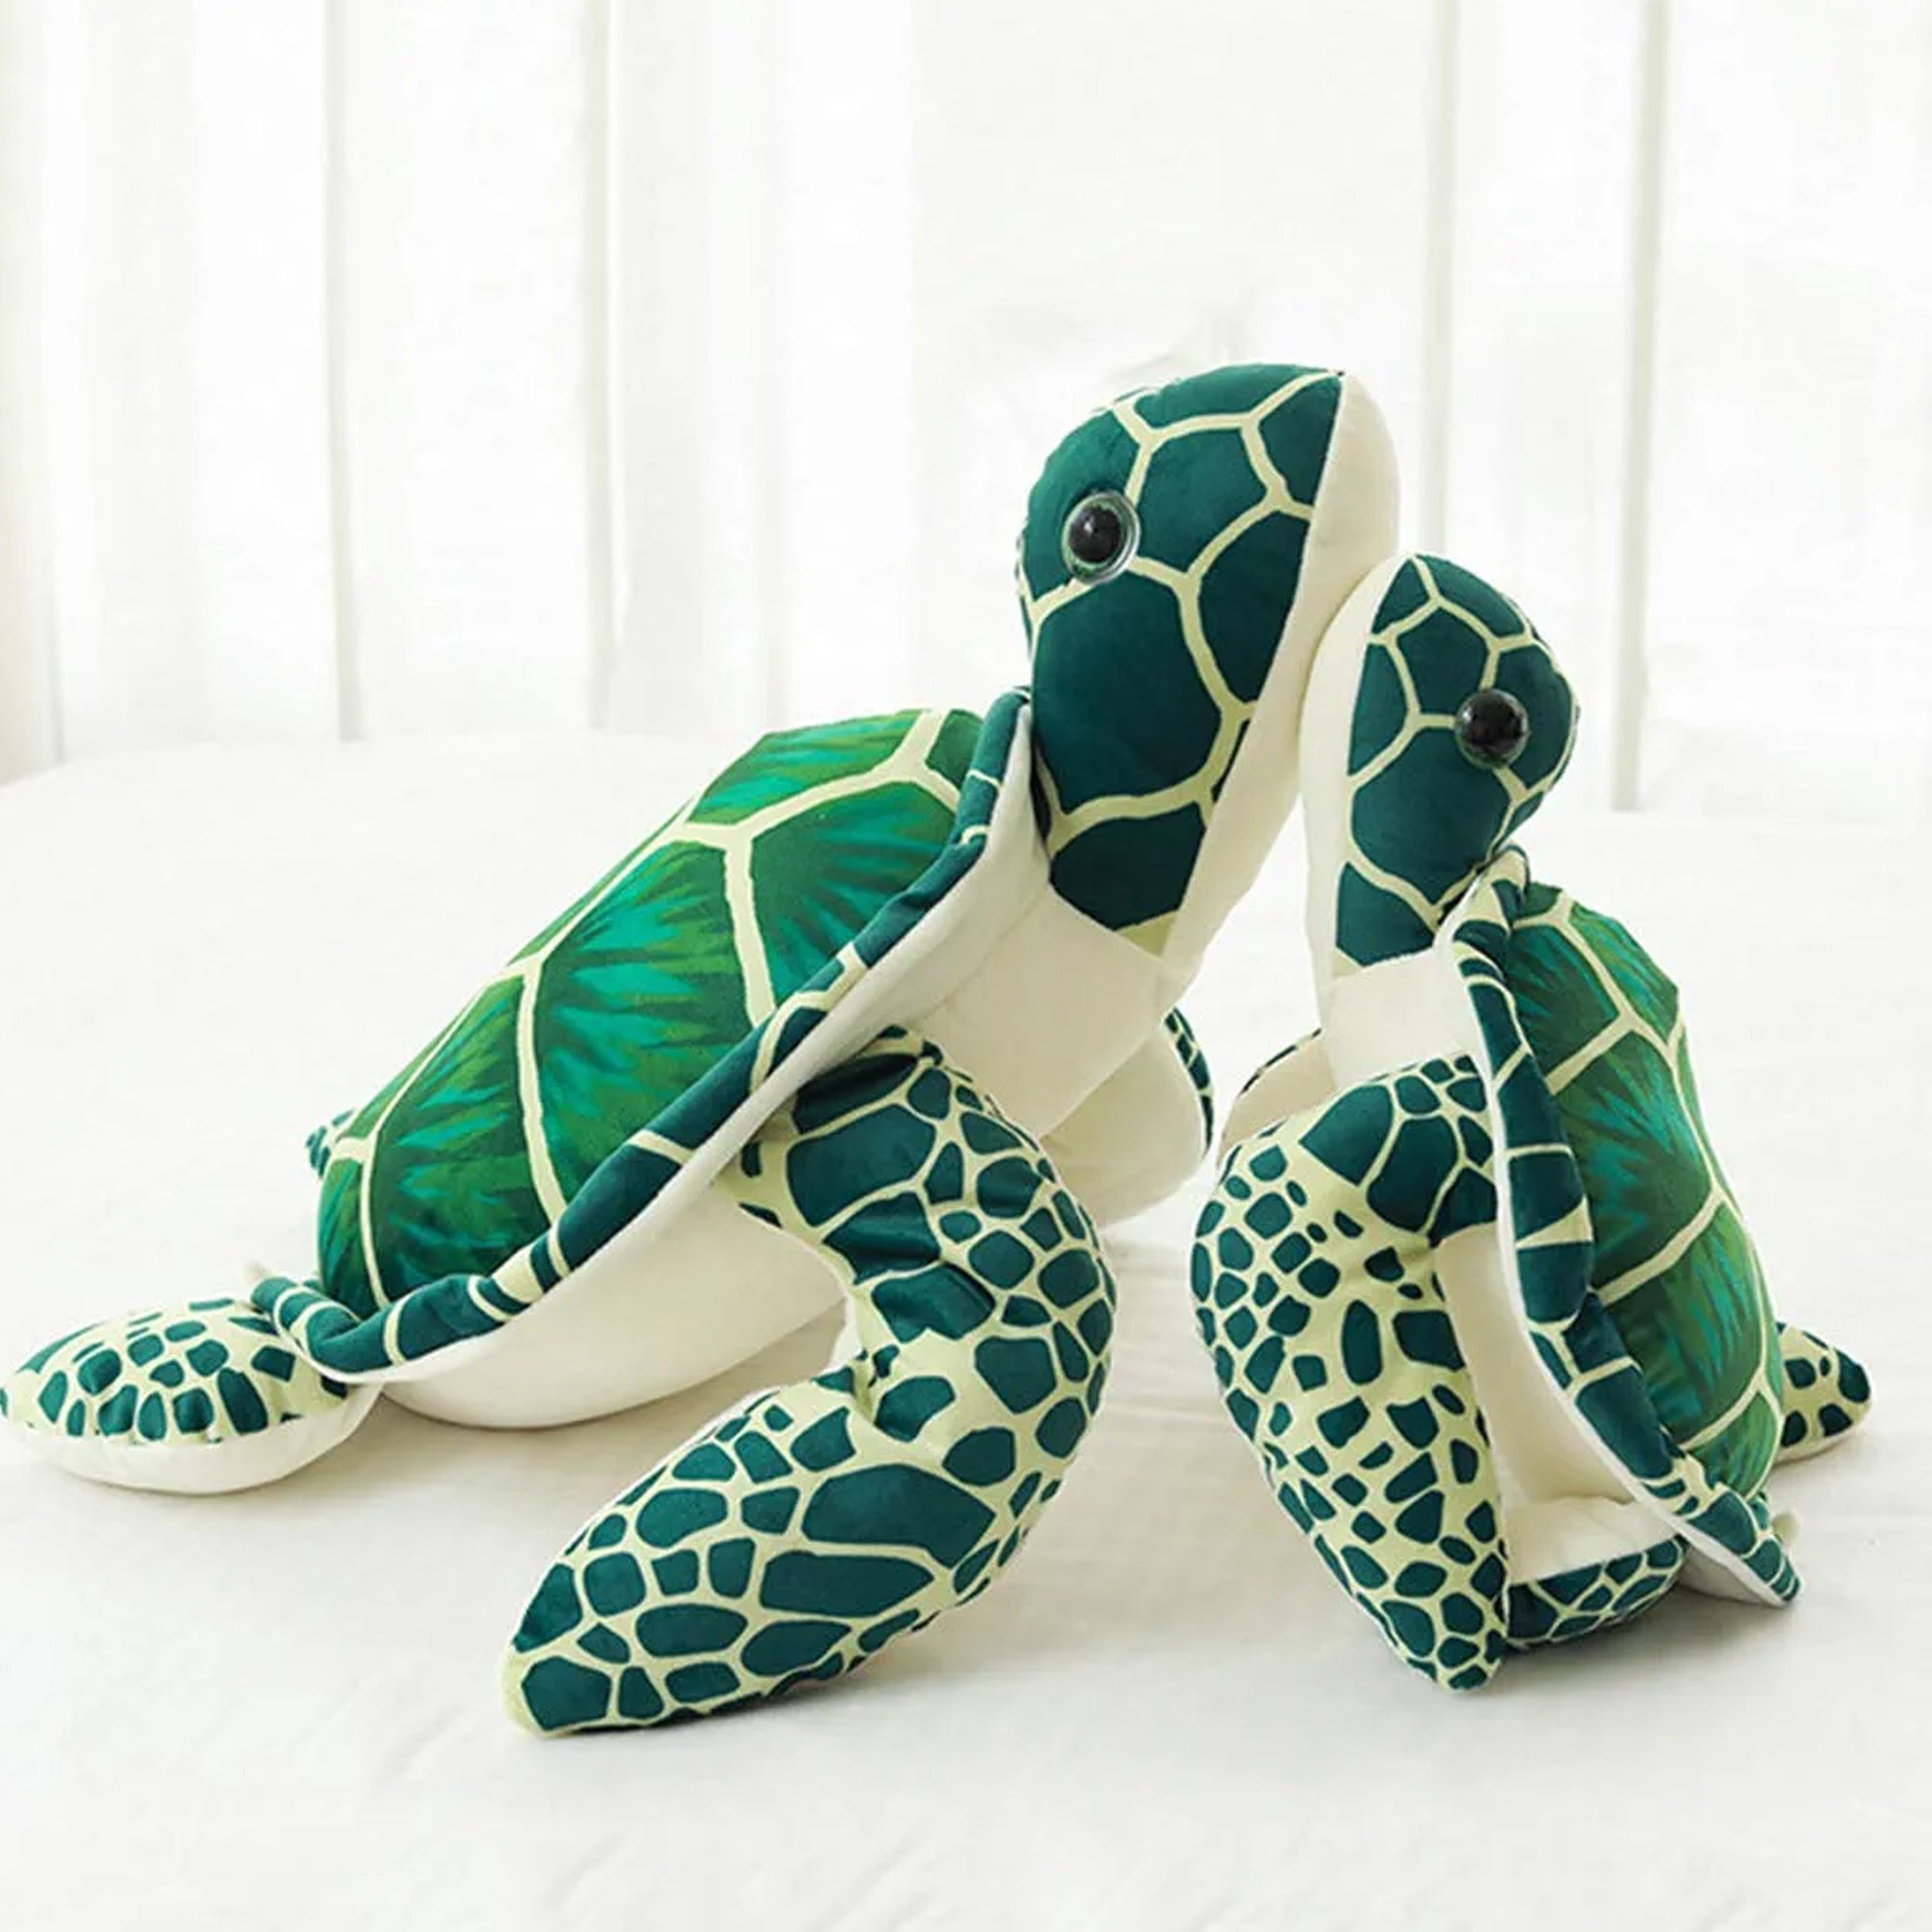 Dive into Adventure with New Sea Turtle Plush Toys for Kids